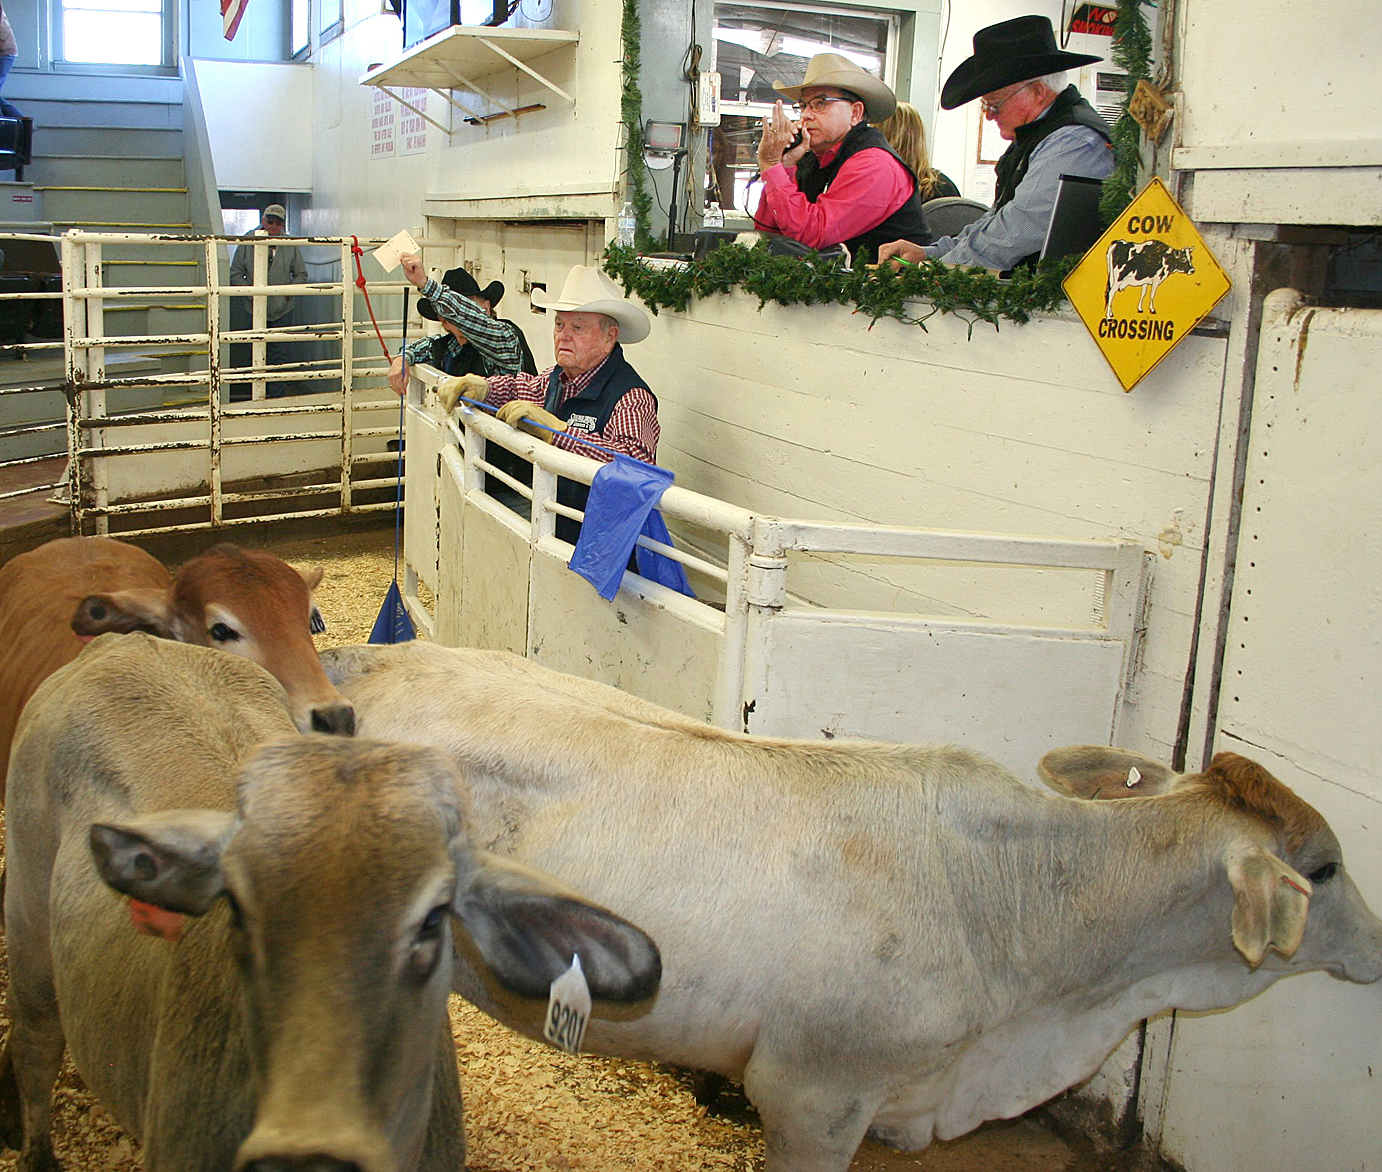 4,281 Head of Pre-conditioned Cattle Sold at the December Northeast Texas Beef Improvement Organization’s (NETBIO) Pre-conditioned Calf and Yearling Sale